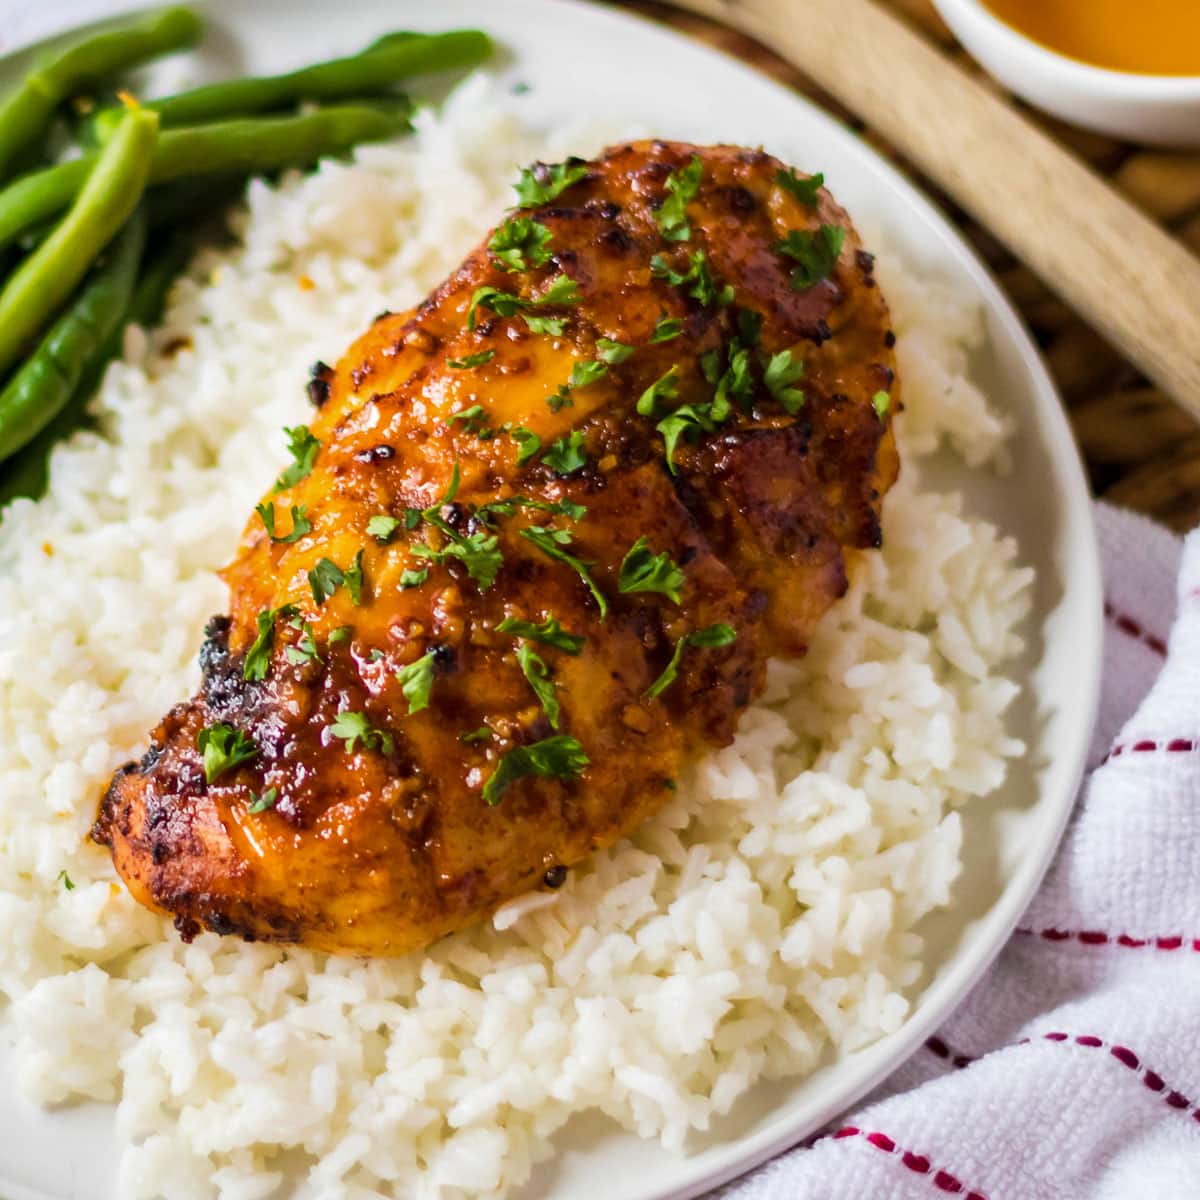 Hot honey chicken on a bed of rice.